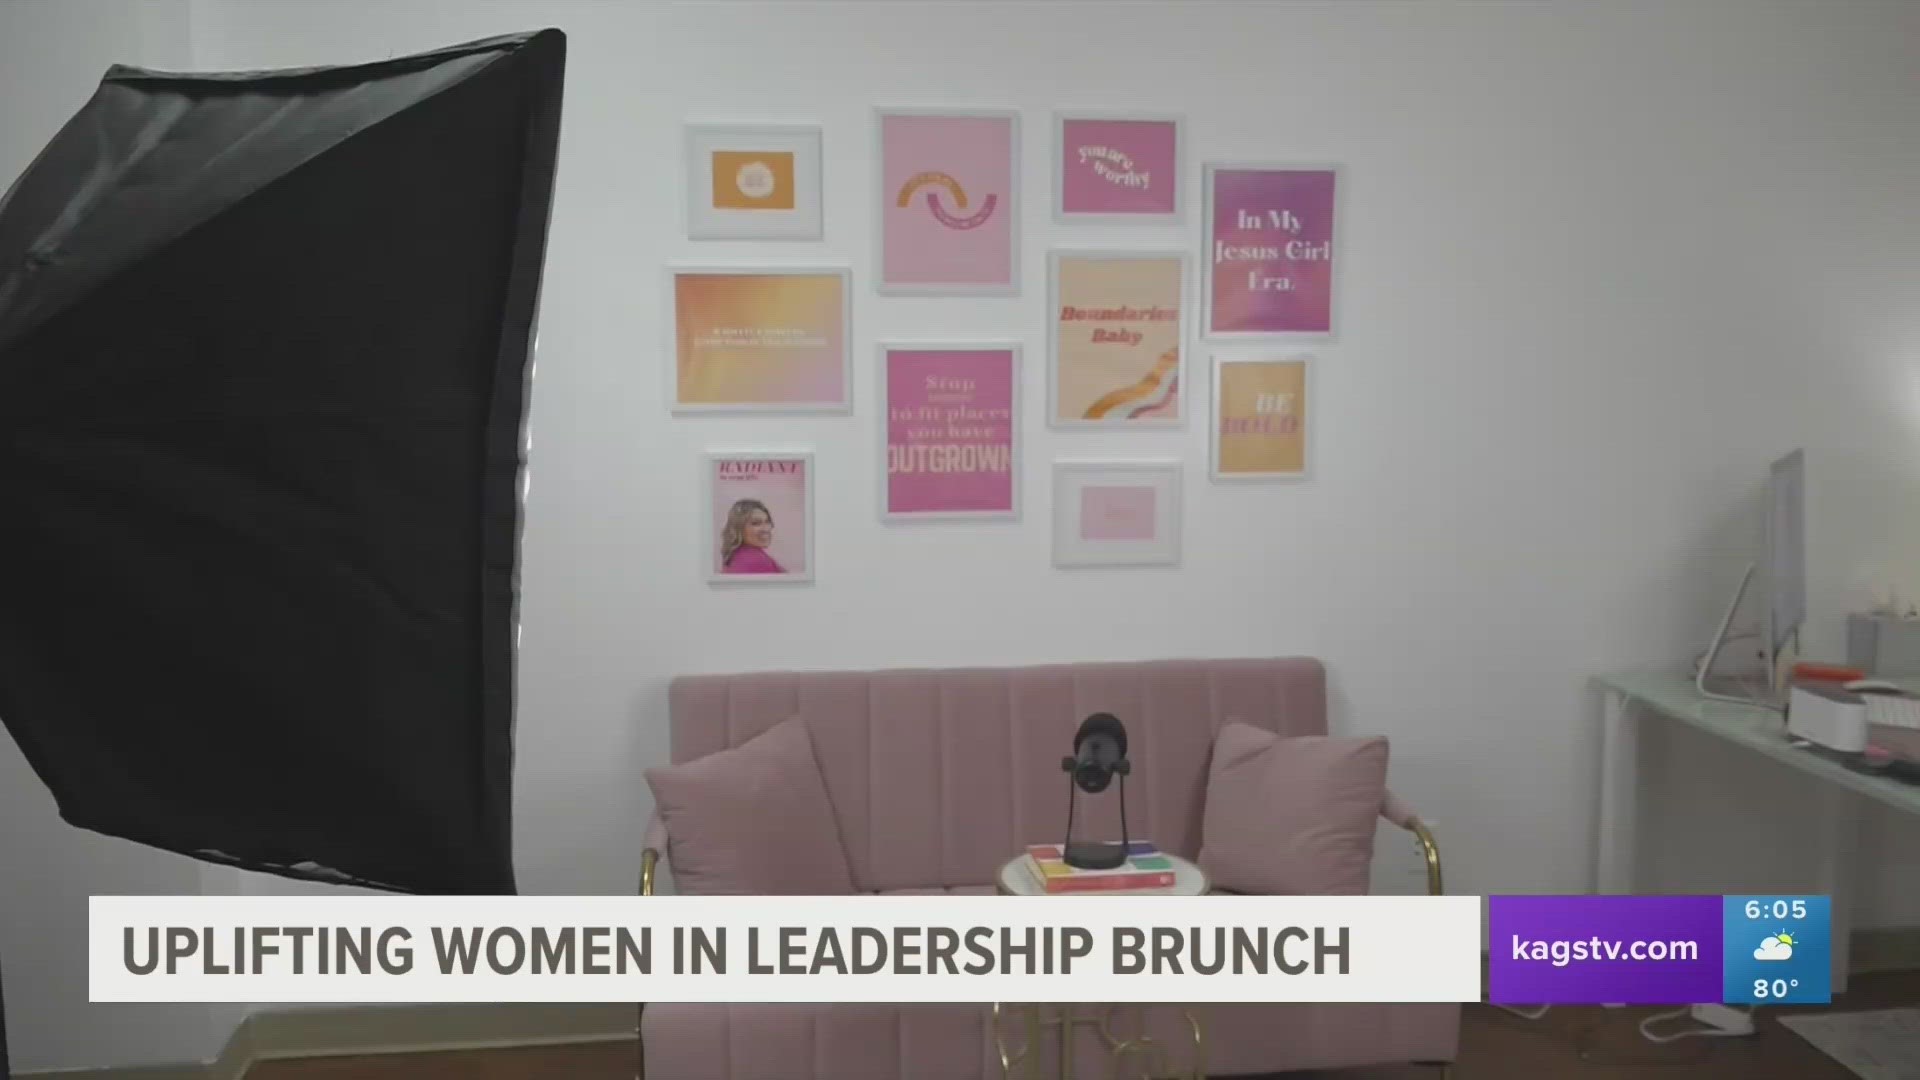 Beth Medley, a local life coach, will host a women in leadership brunch in Navasota on Sunday, June 3 to connect women of all industries.